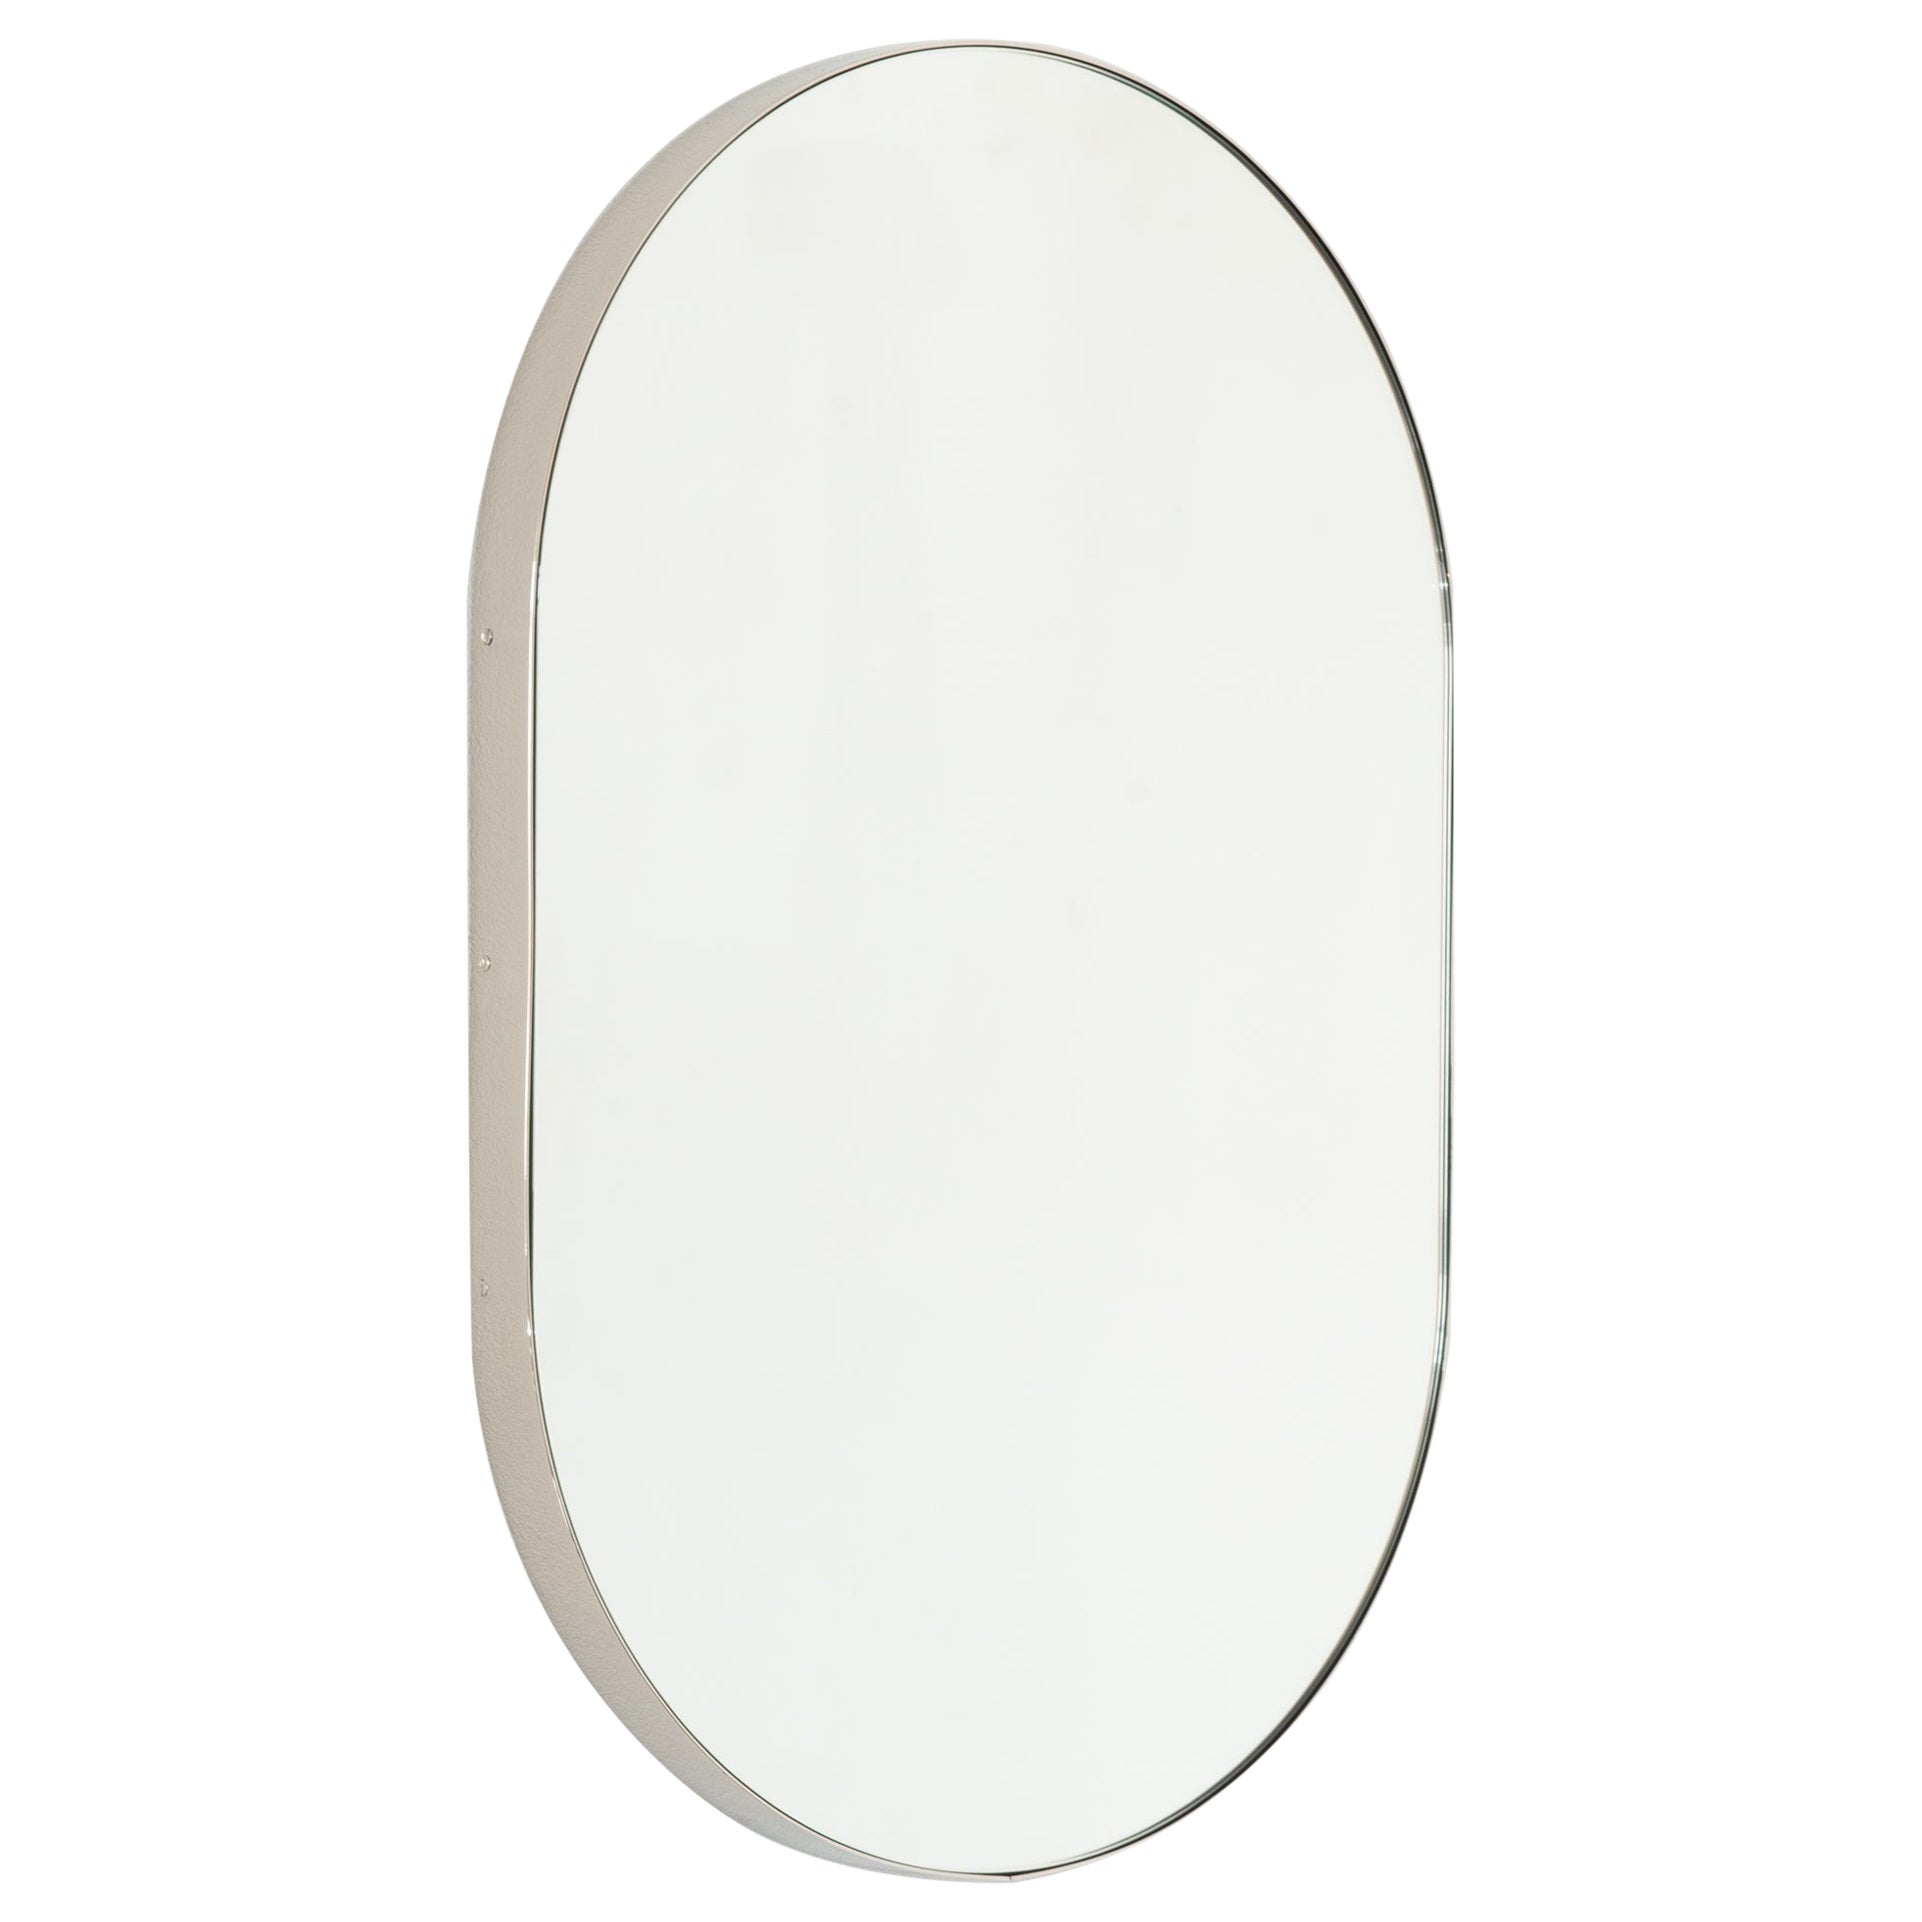 Capsula Pill Shaped Contemporary Mirror with Nickel Plated Frame, Large